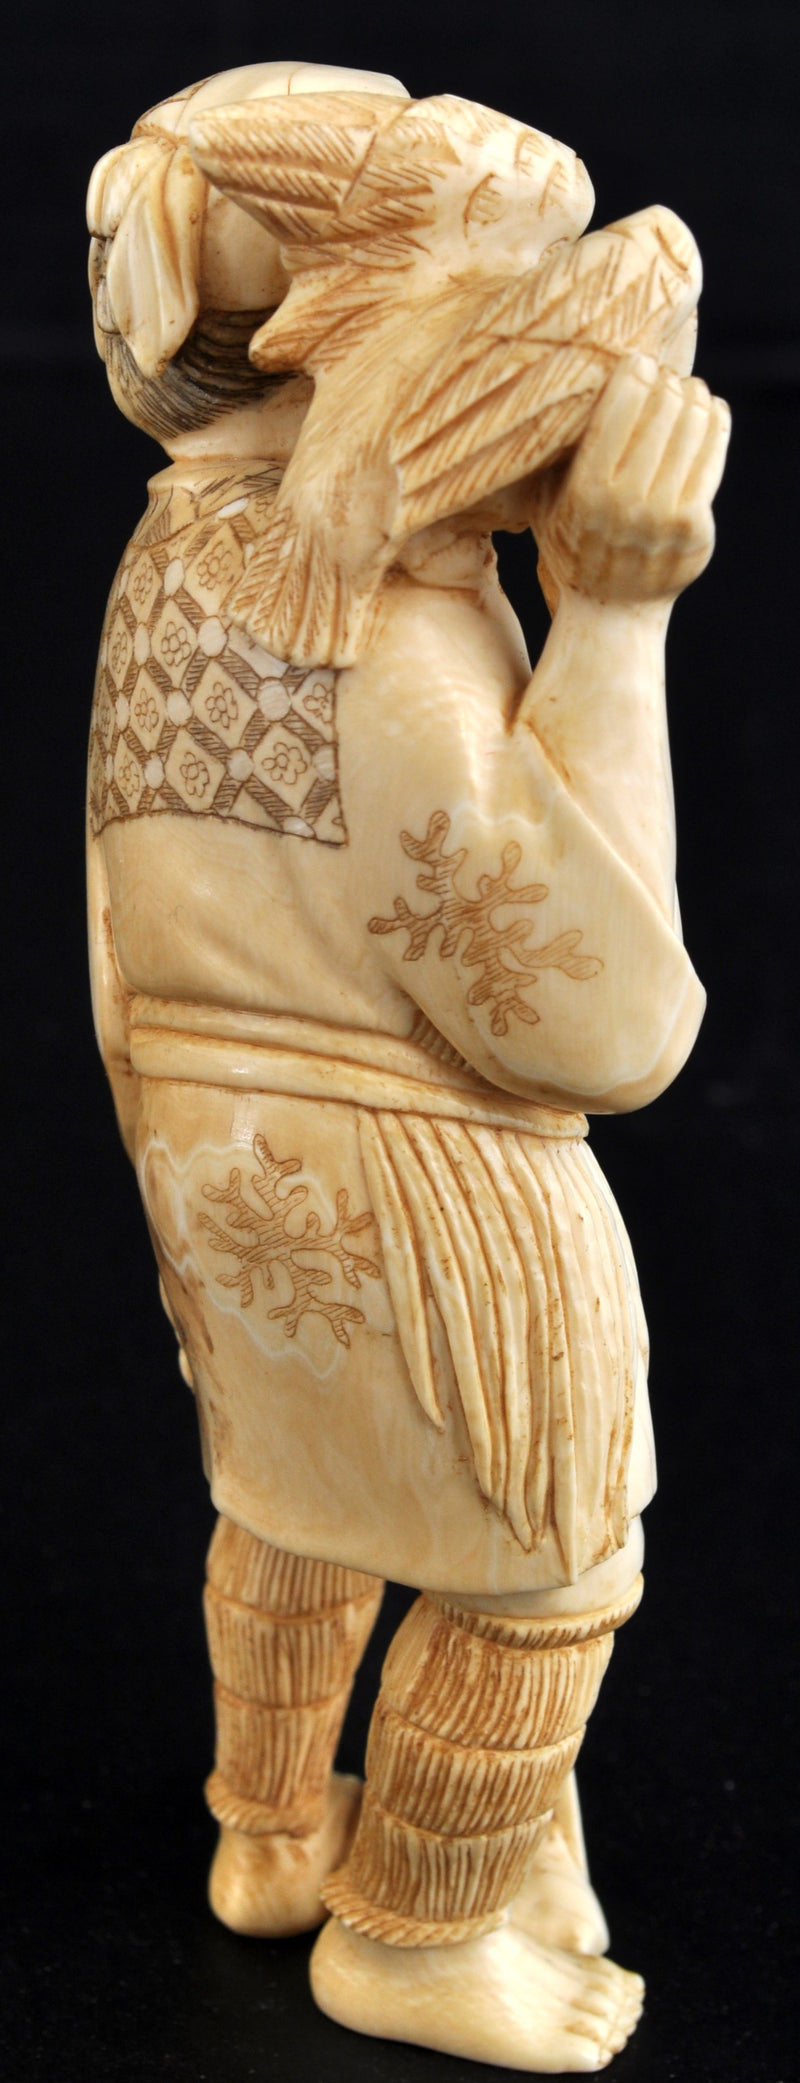 Antique Japanese Meiji Period Carved Ivory Figure of a Fisherman, Circa 1880